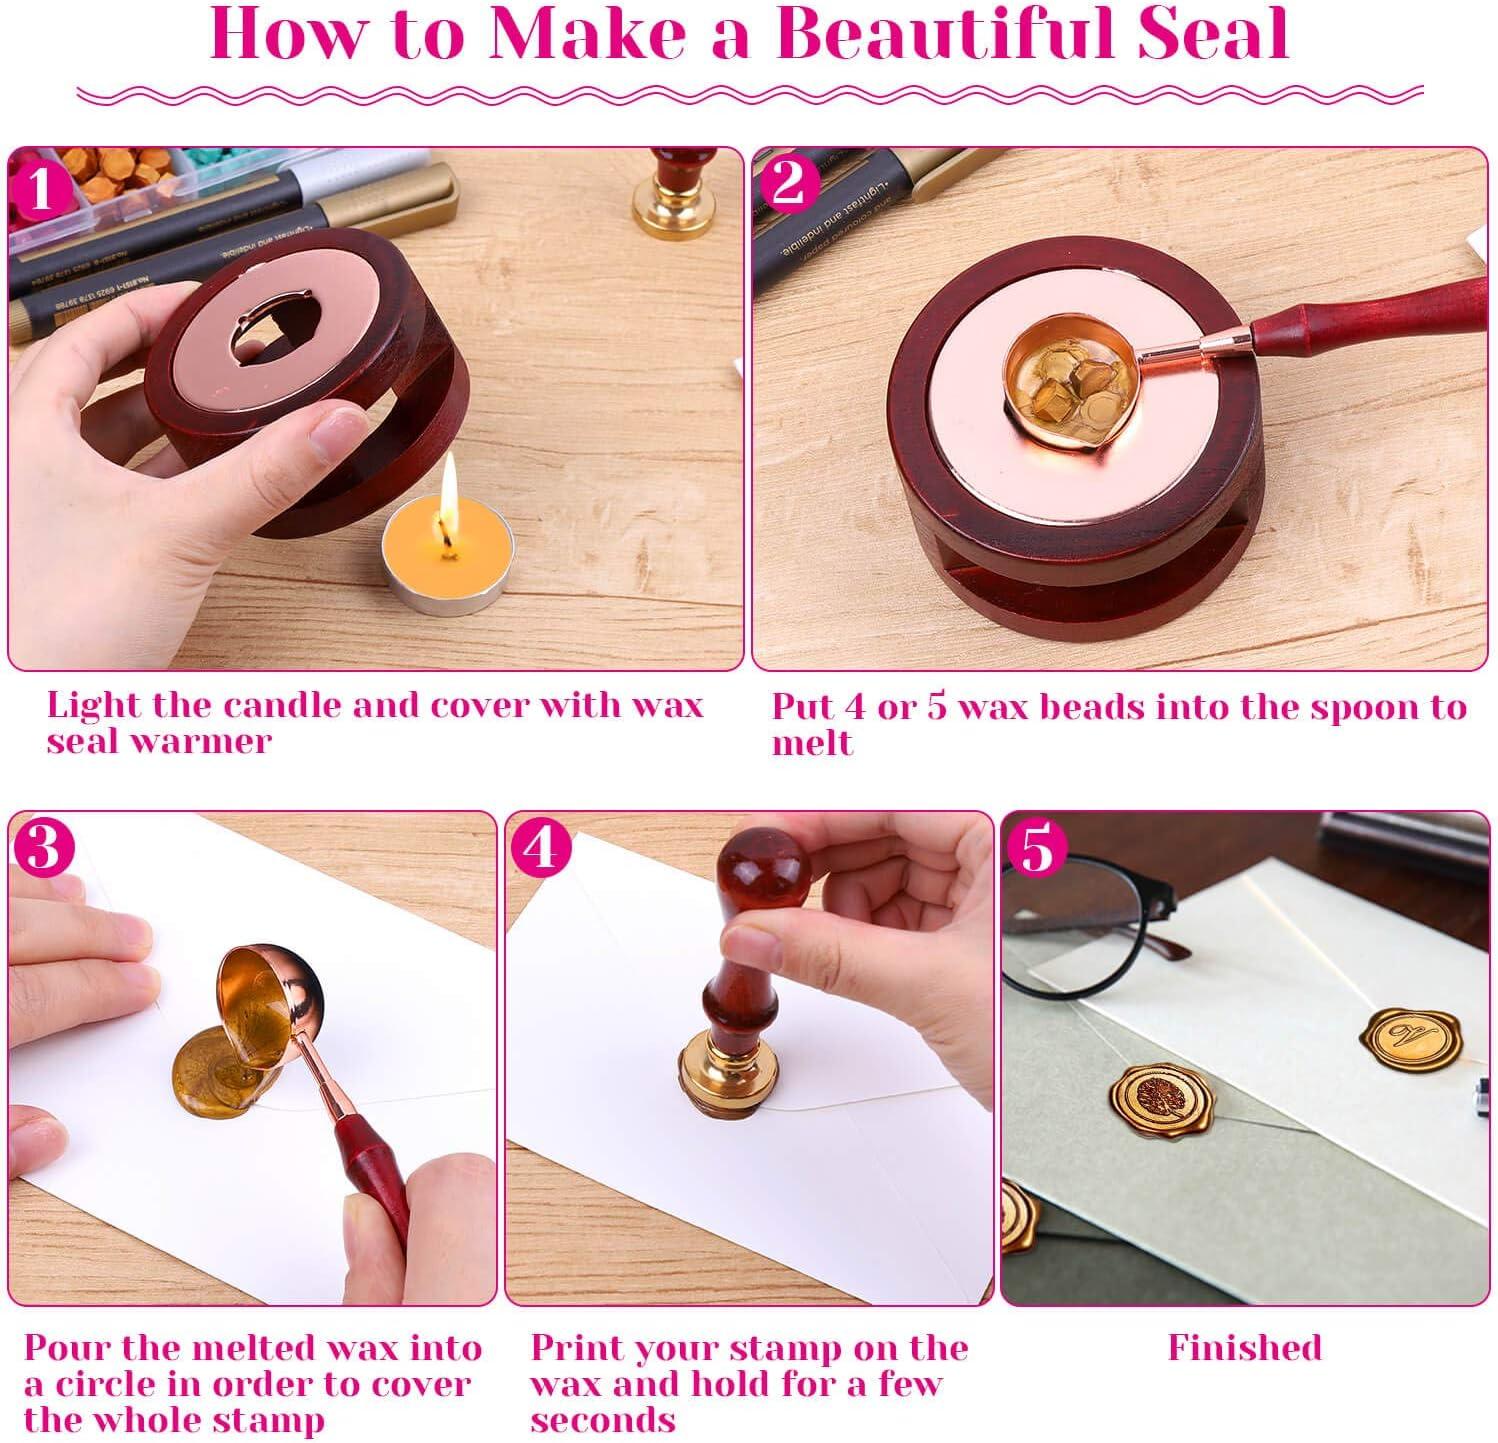 Sealing Wax Paxcoo 312pcs Sealing Wax Kit with Wax Seal Beads Wax Seal  Warmer Wax Spoon and Tealight Candles for Wax Stamp Letter Sealing Gold